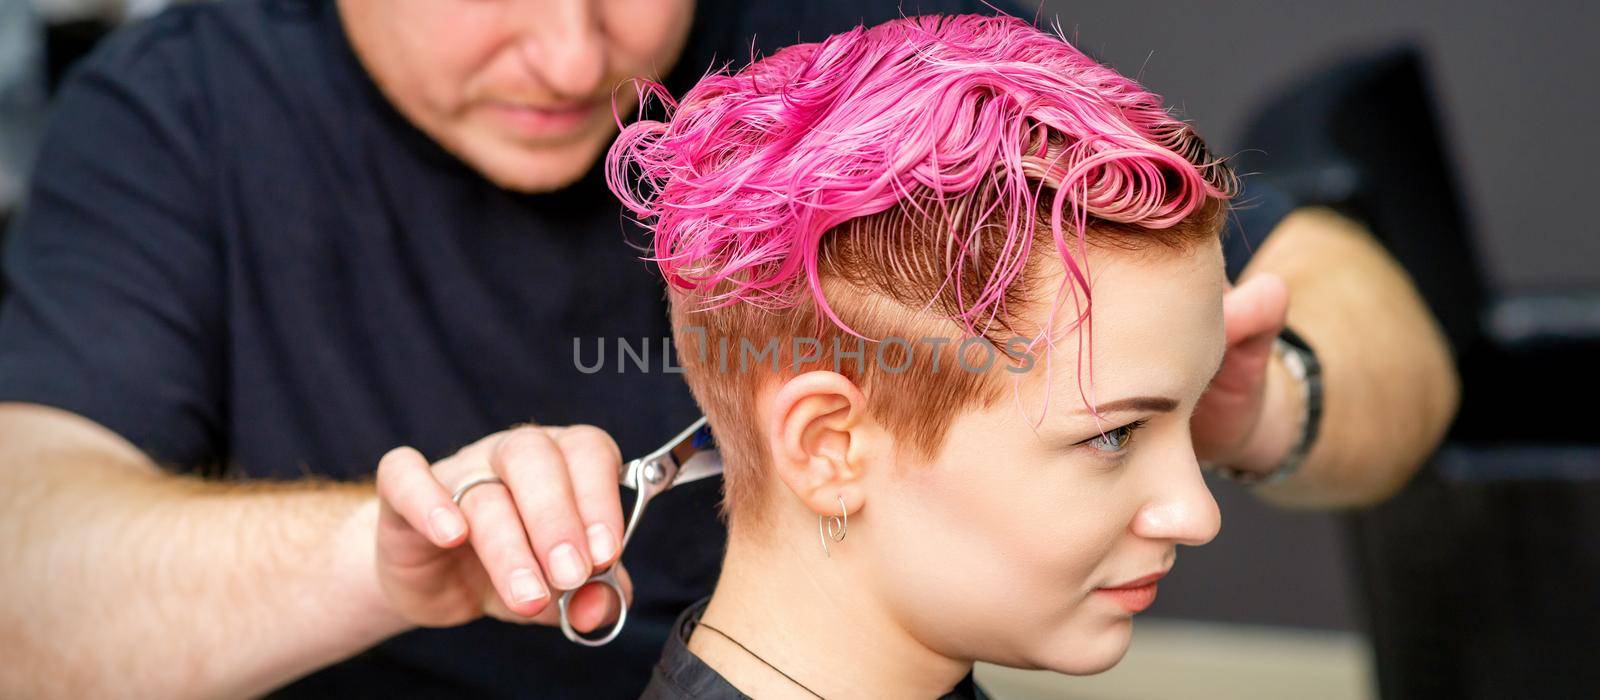 Woman having a new haircut. A male hairstylist is cutting dyed pink short hair with scissors in a hair salon. by okskukuruza